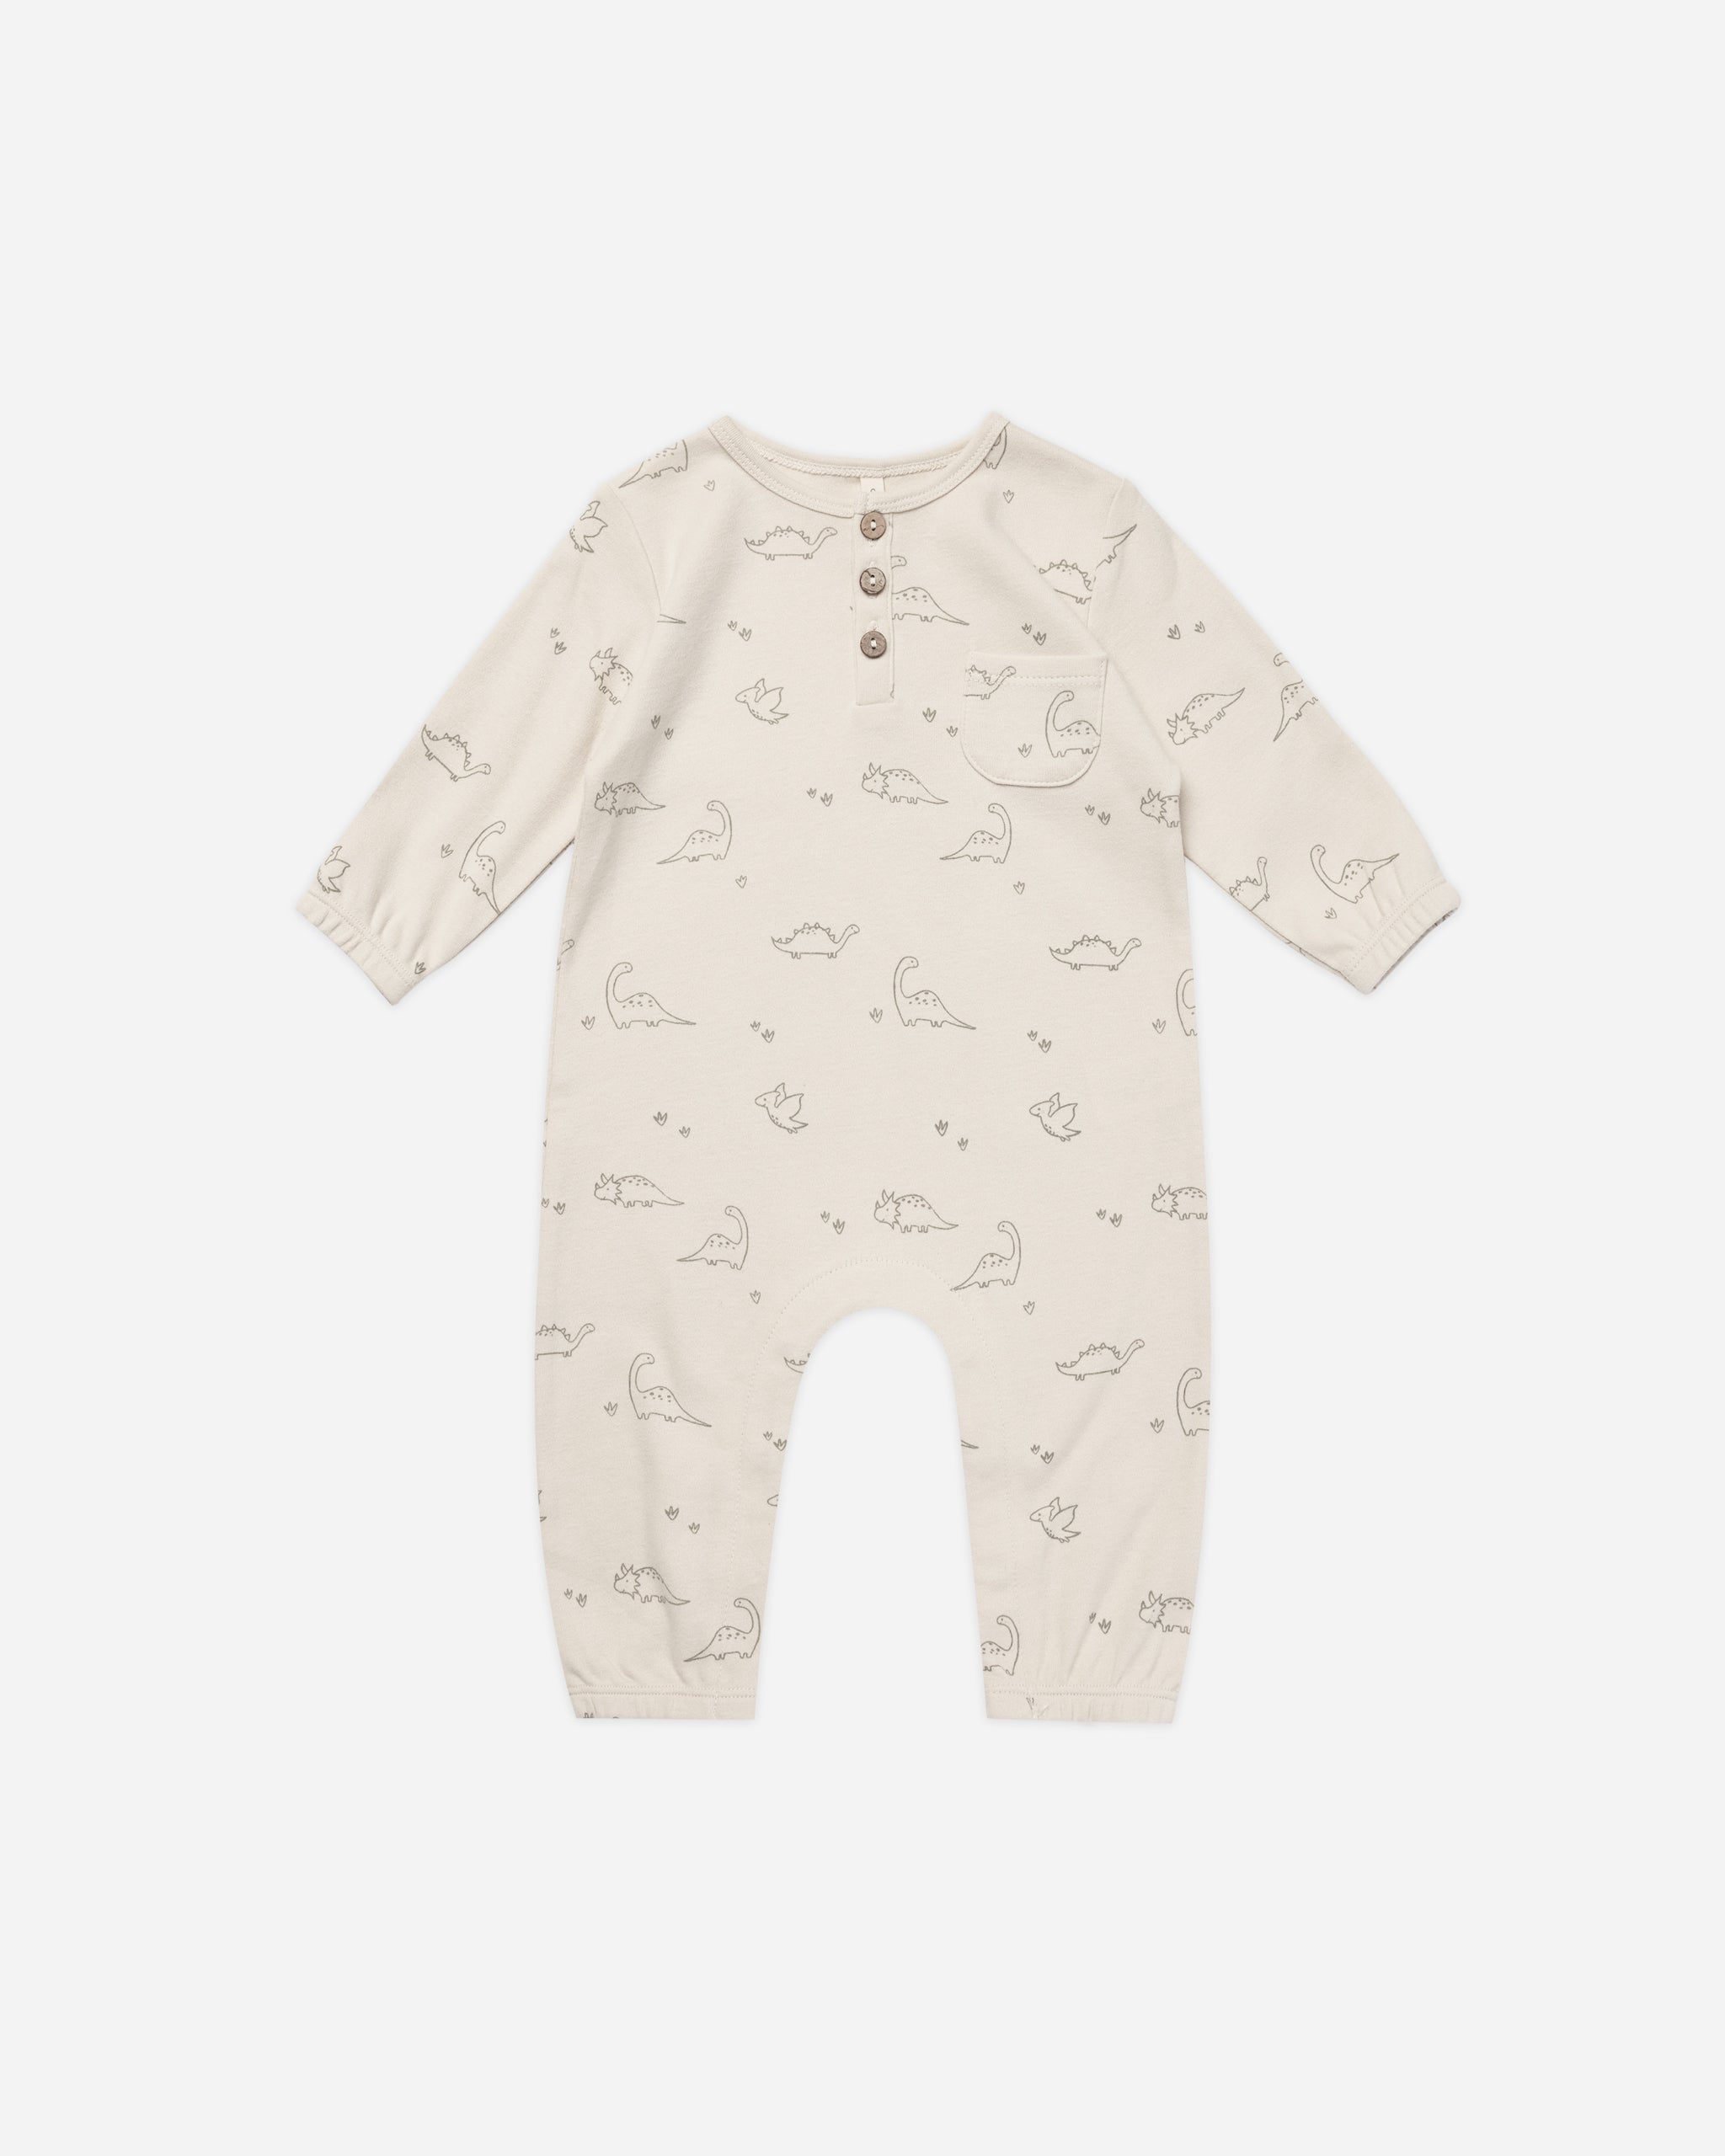 Long Sleeve Jumpsuit || Dinos - Rylee + Cru | Kids Clothes | Trendy Baby Clothes | Modern Infant Outfits |